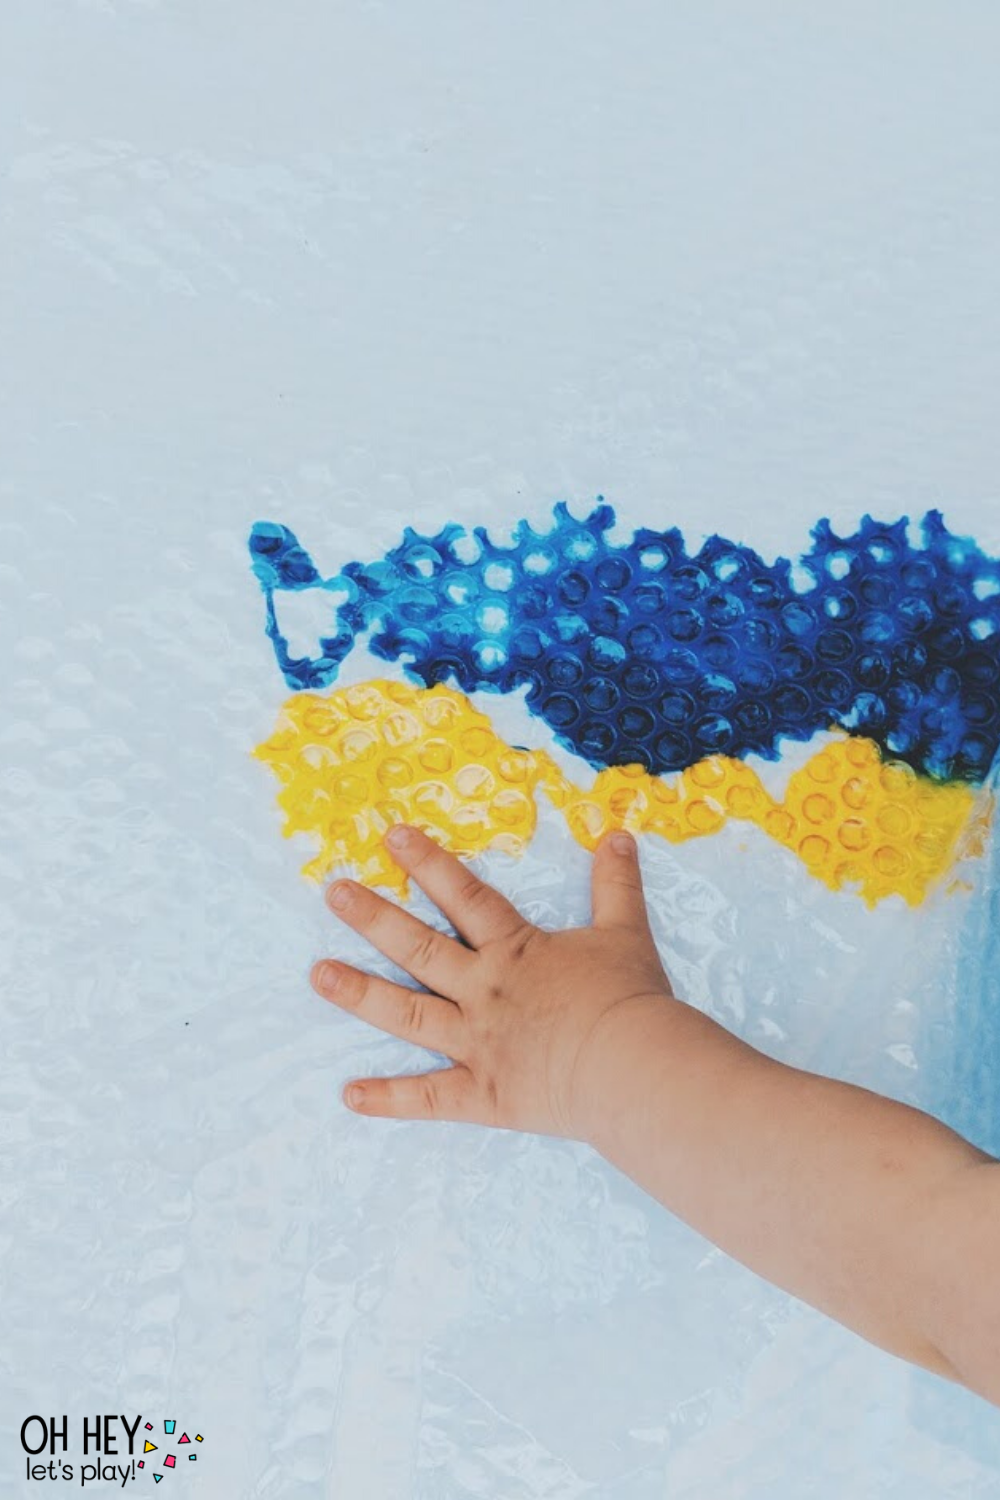 Bubble Wrap Sensory Paint 2 30+ Activities for 1-2 Year Old Toddlers - Oh Hey Let's Play www.ohheyletsplay.com.png